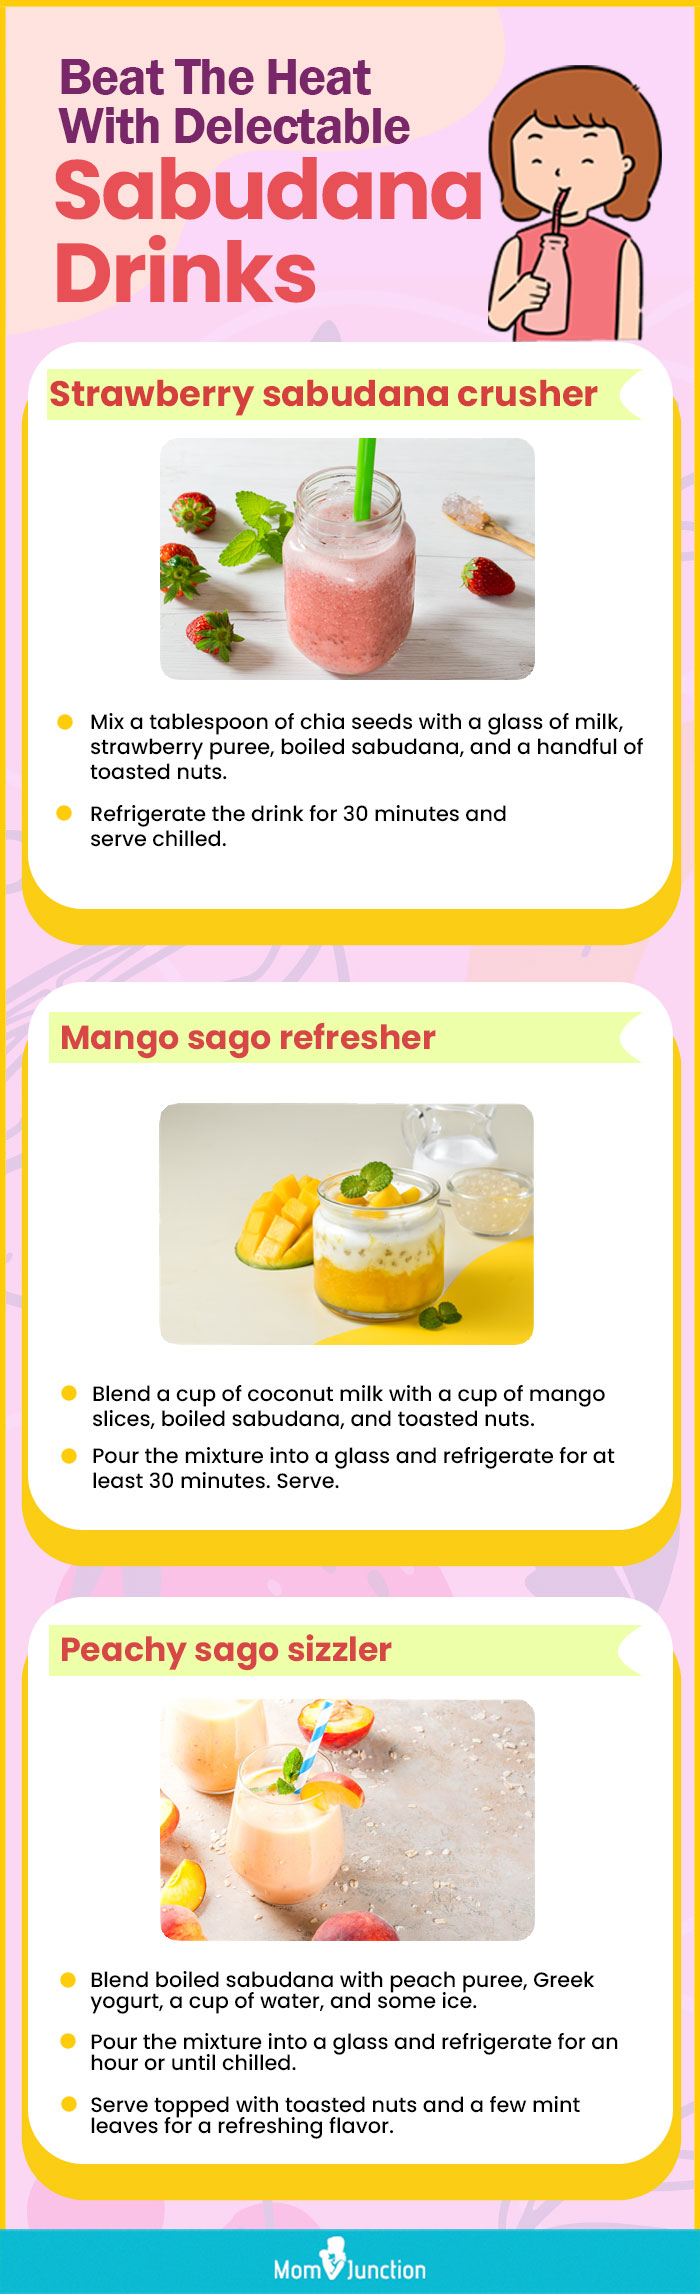 beat the heat with delectable sabudana drinks (infographic)